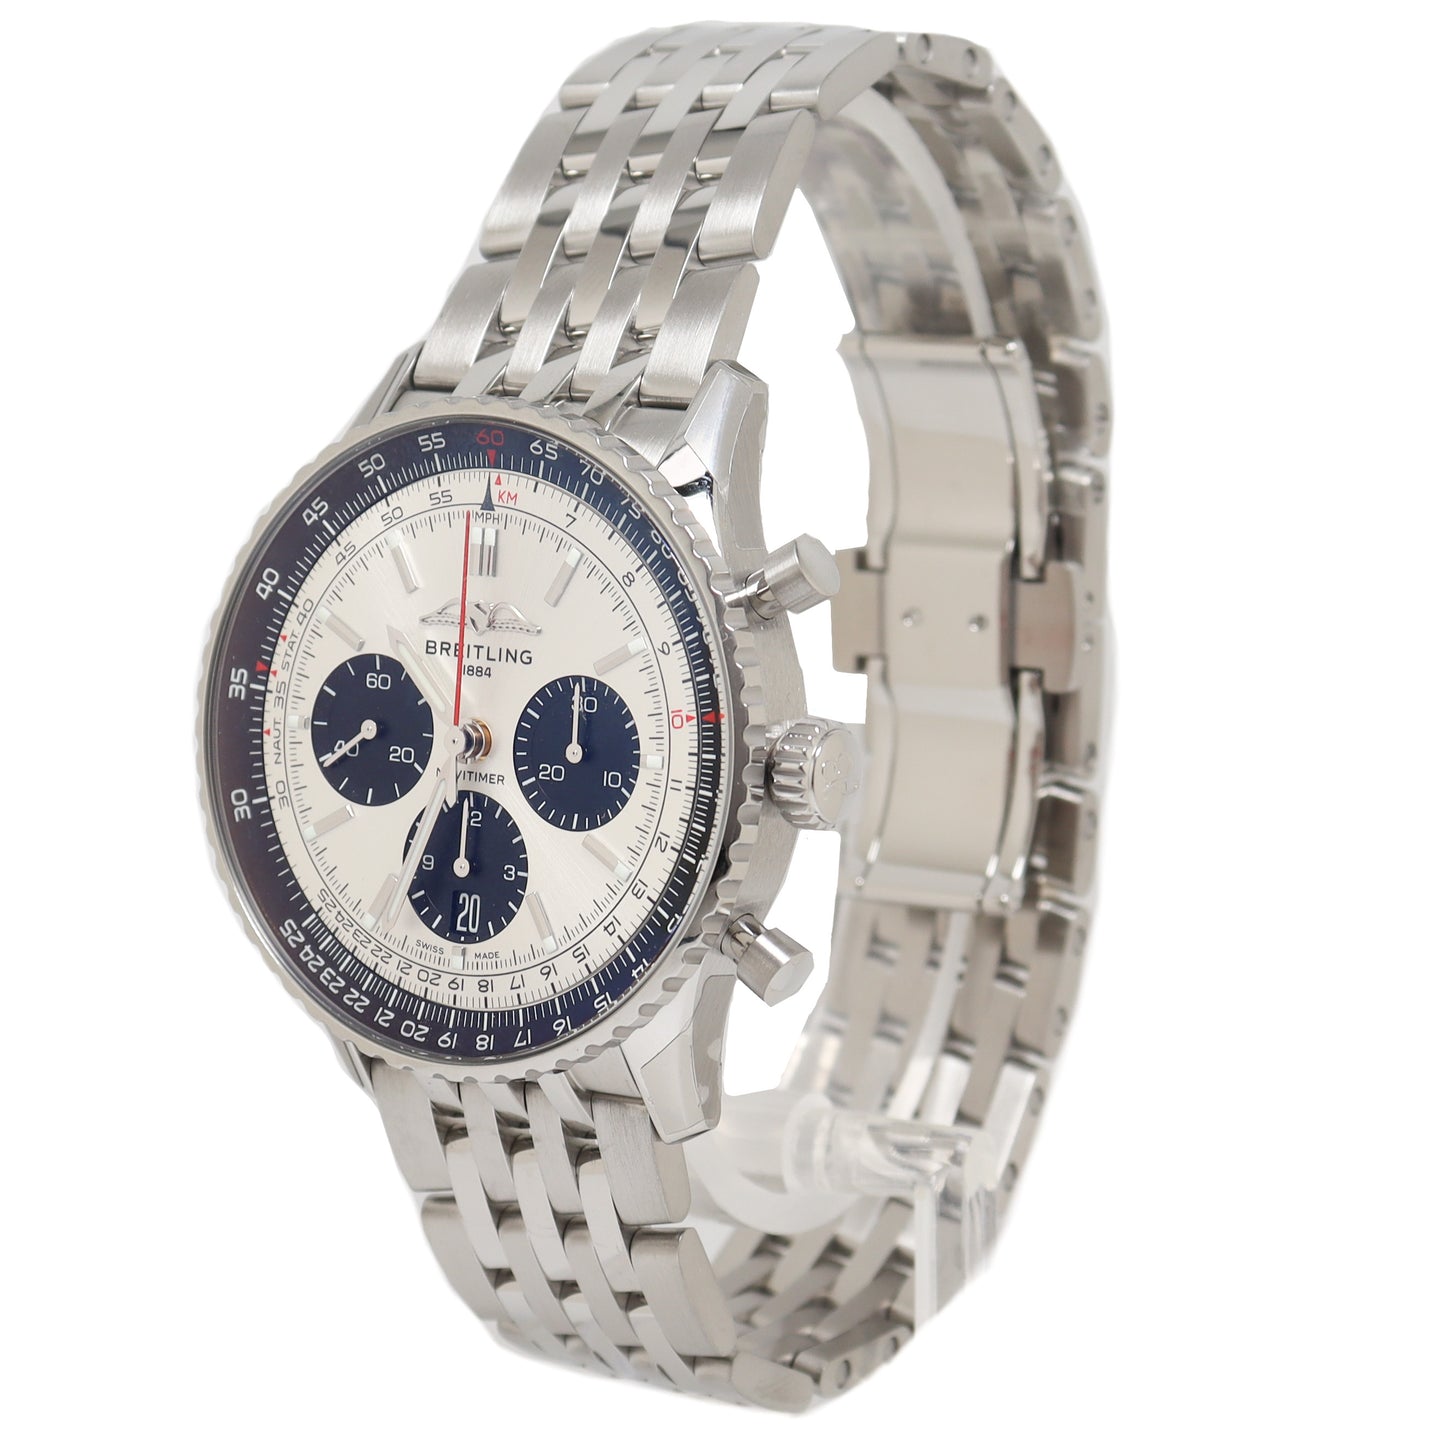 Breitling Navitimer Stainless Steel 43mm Silver Chronograph Dial Watch Reference# AB0138 - Happy Jewelers Fine Jewelry Lifetime Warranty